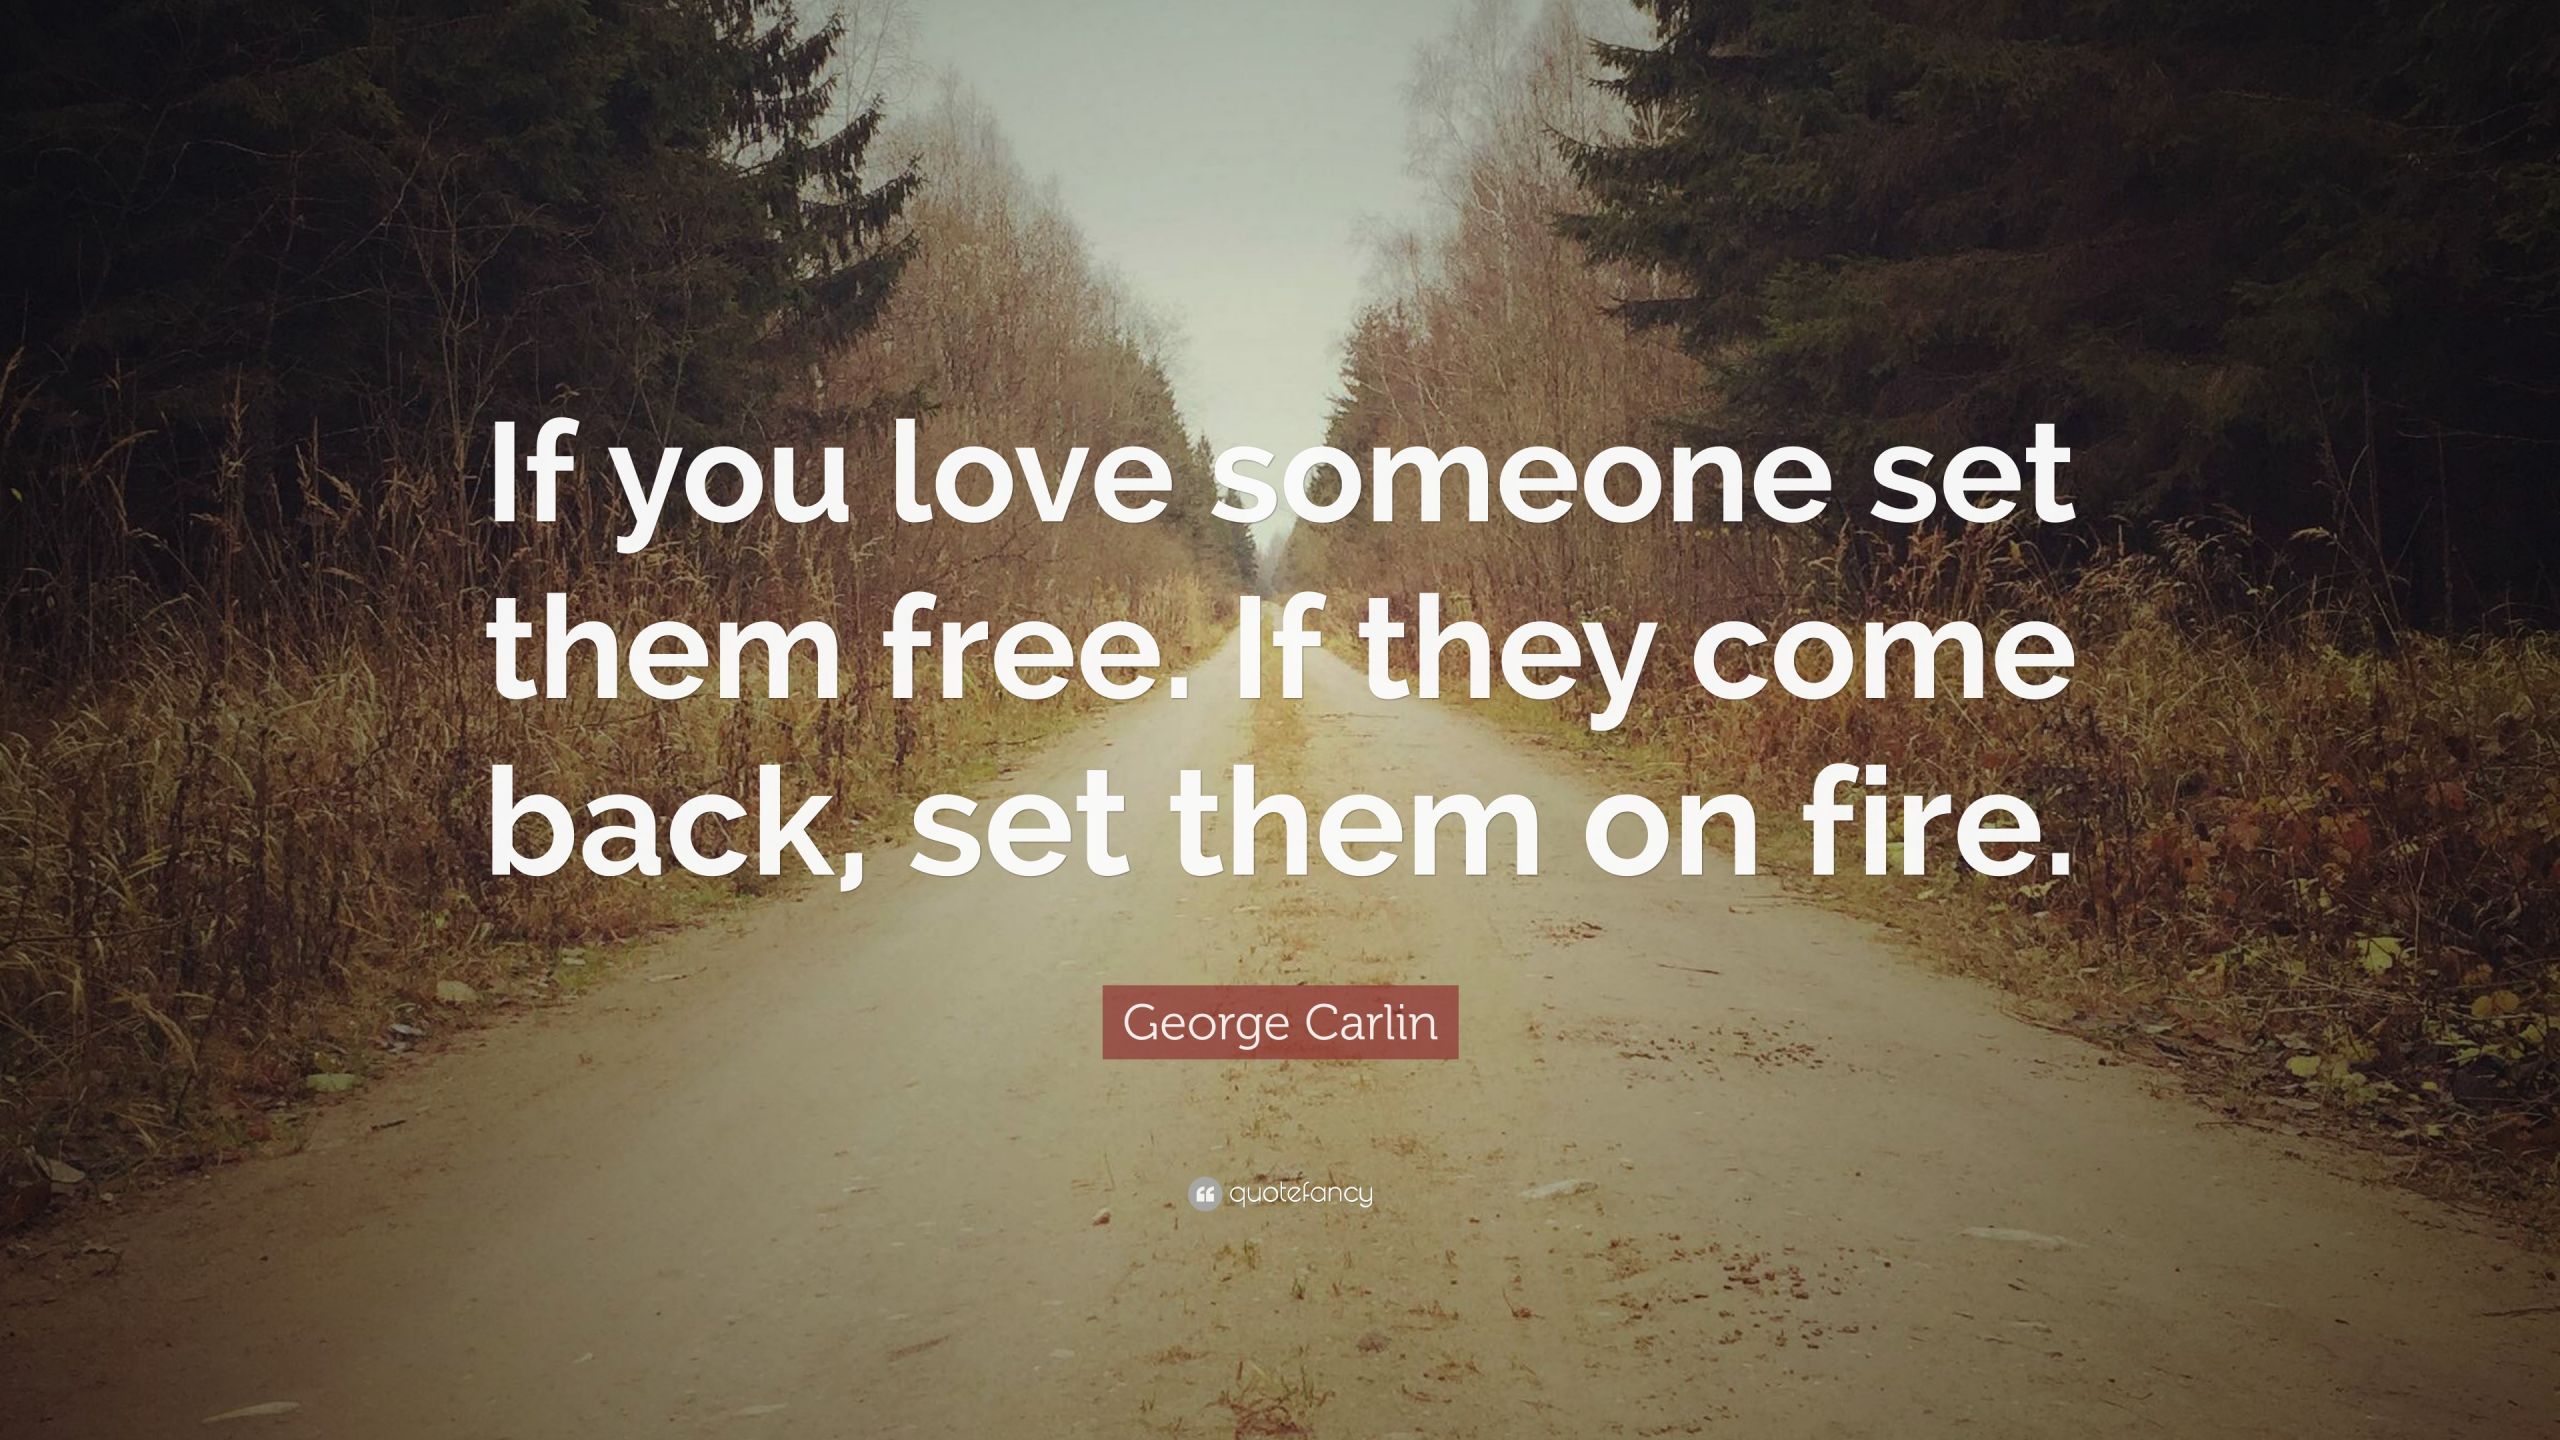 If You Love Someone Set Them Free Quote
 George Carlin Quotes 100 wallpapers Quotefancy